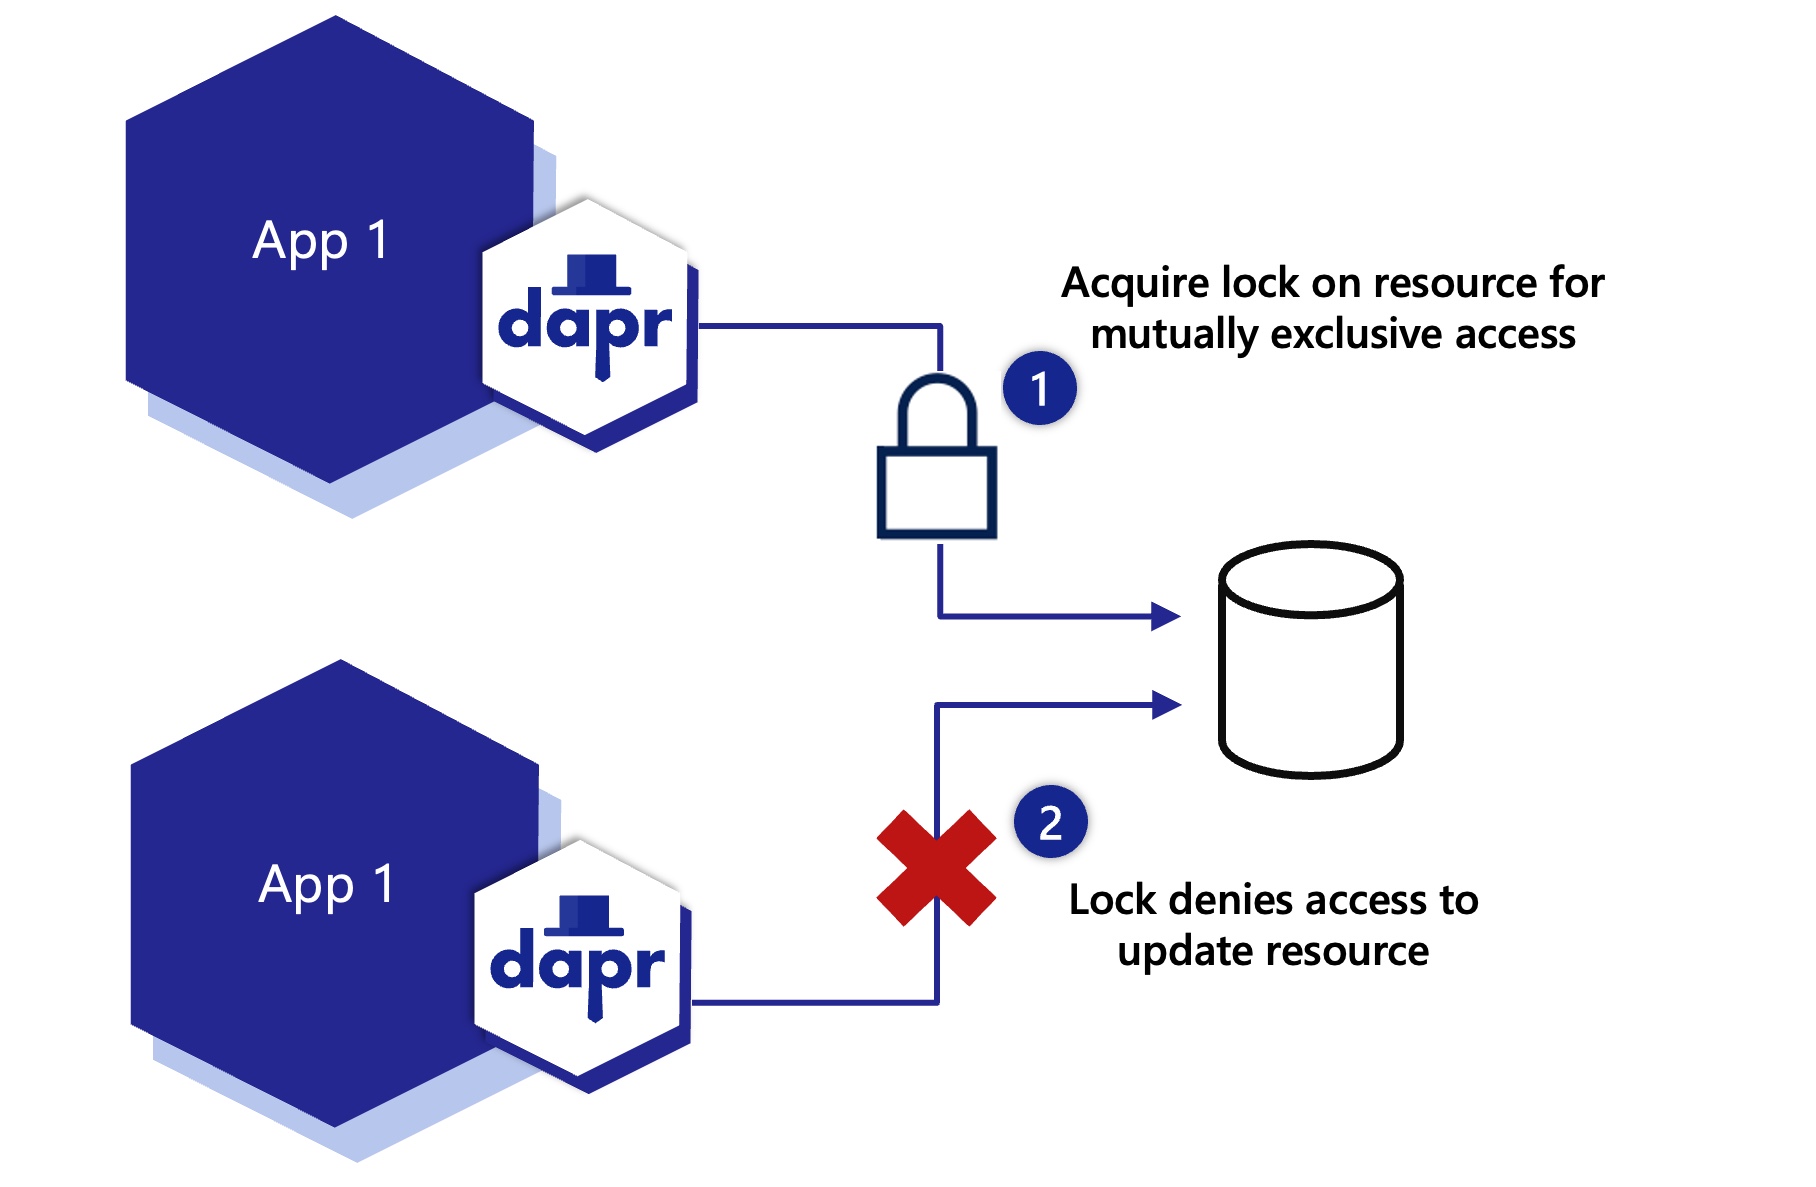 The diagram below shows two instances of the same application acquiring a lock, where one instance is successful and the other is denied